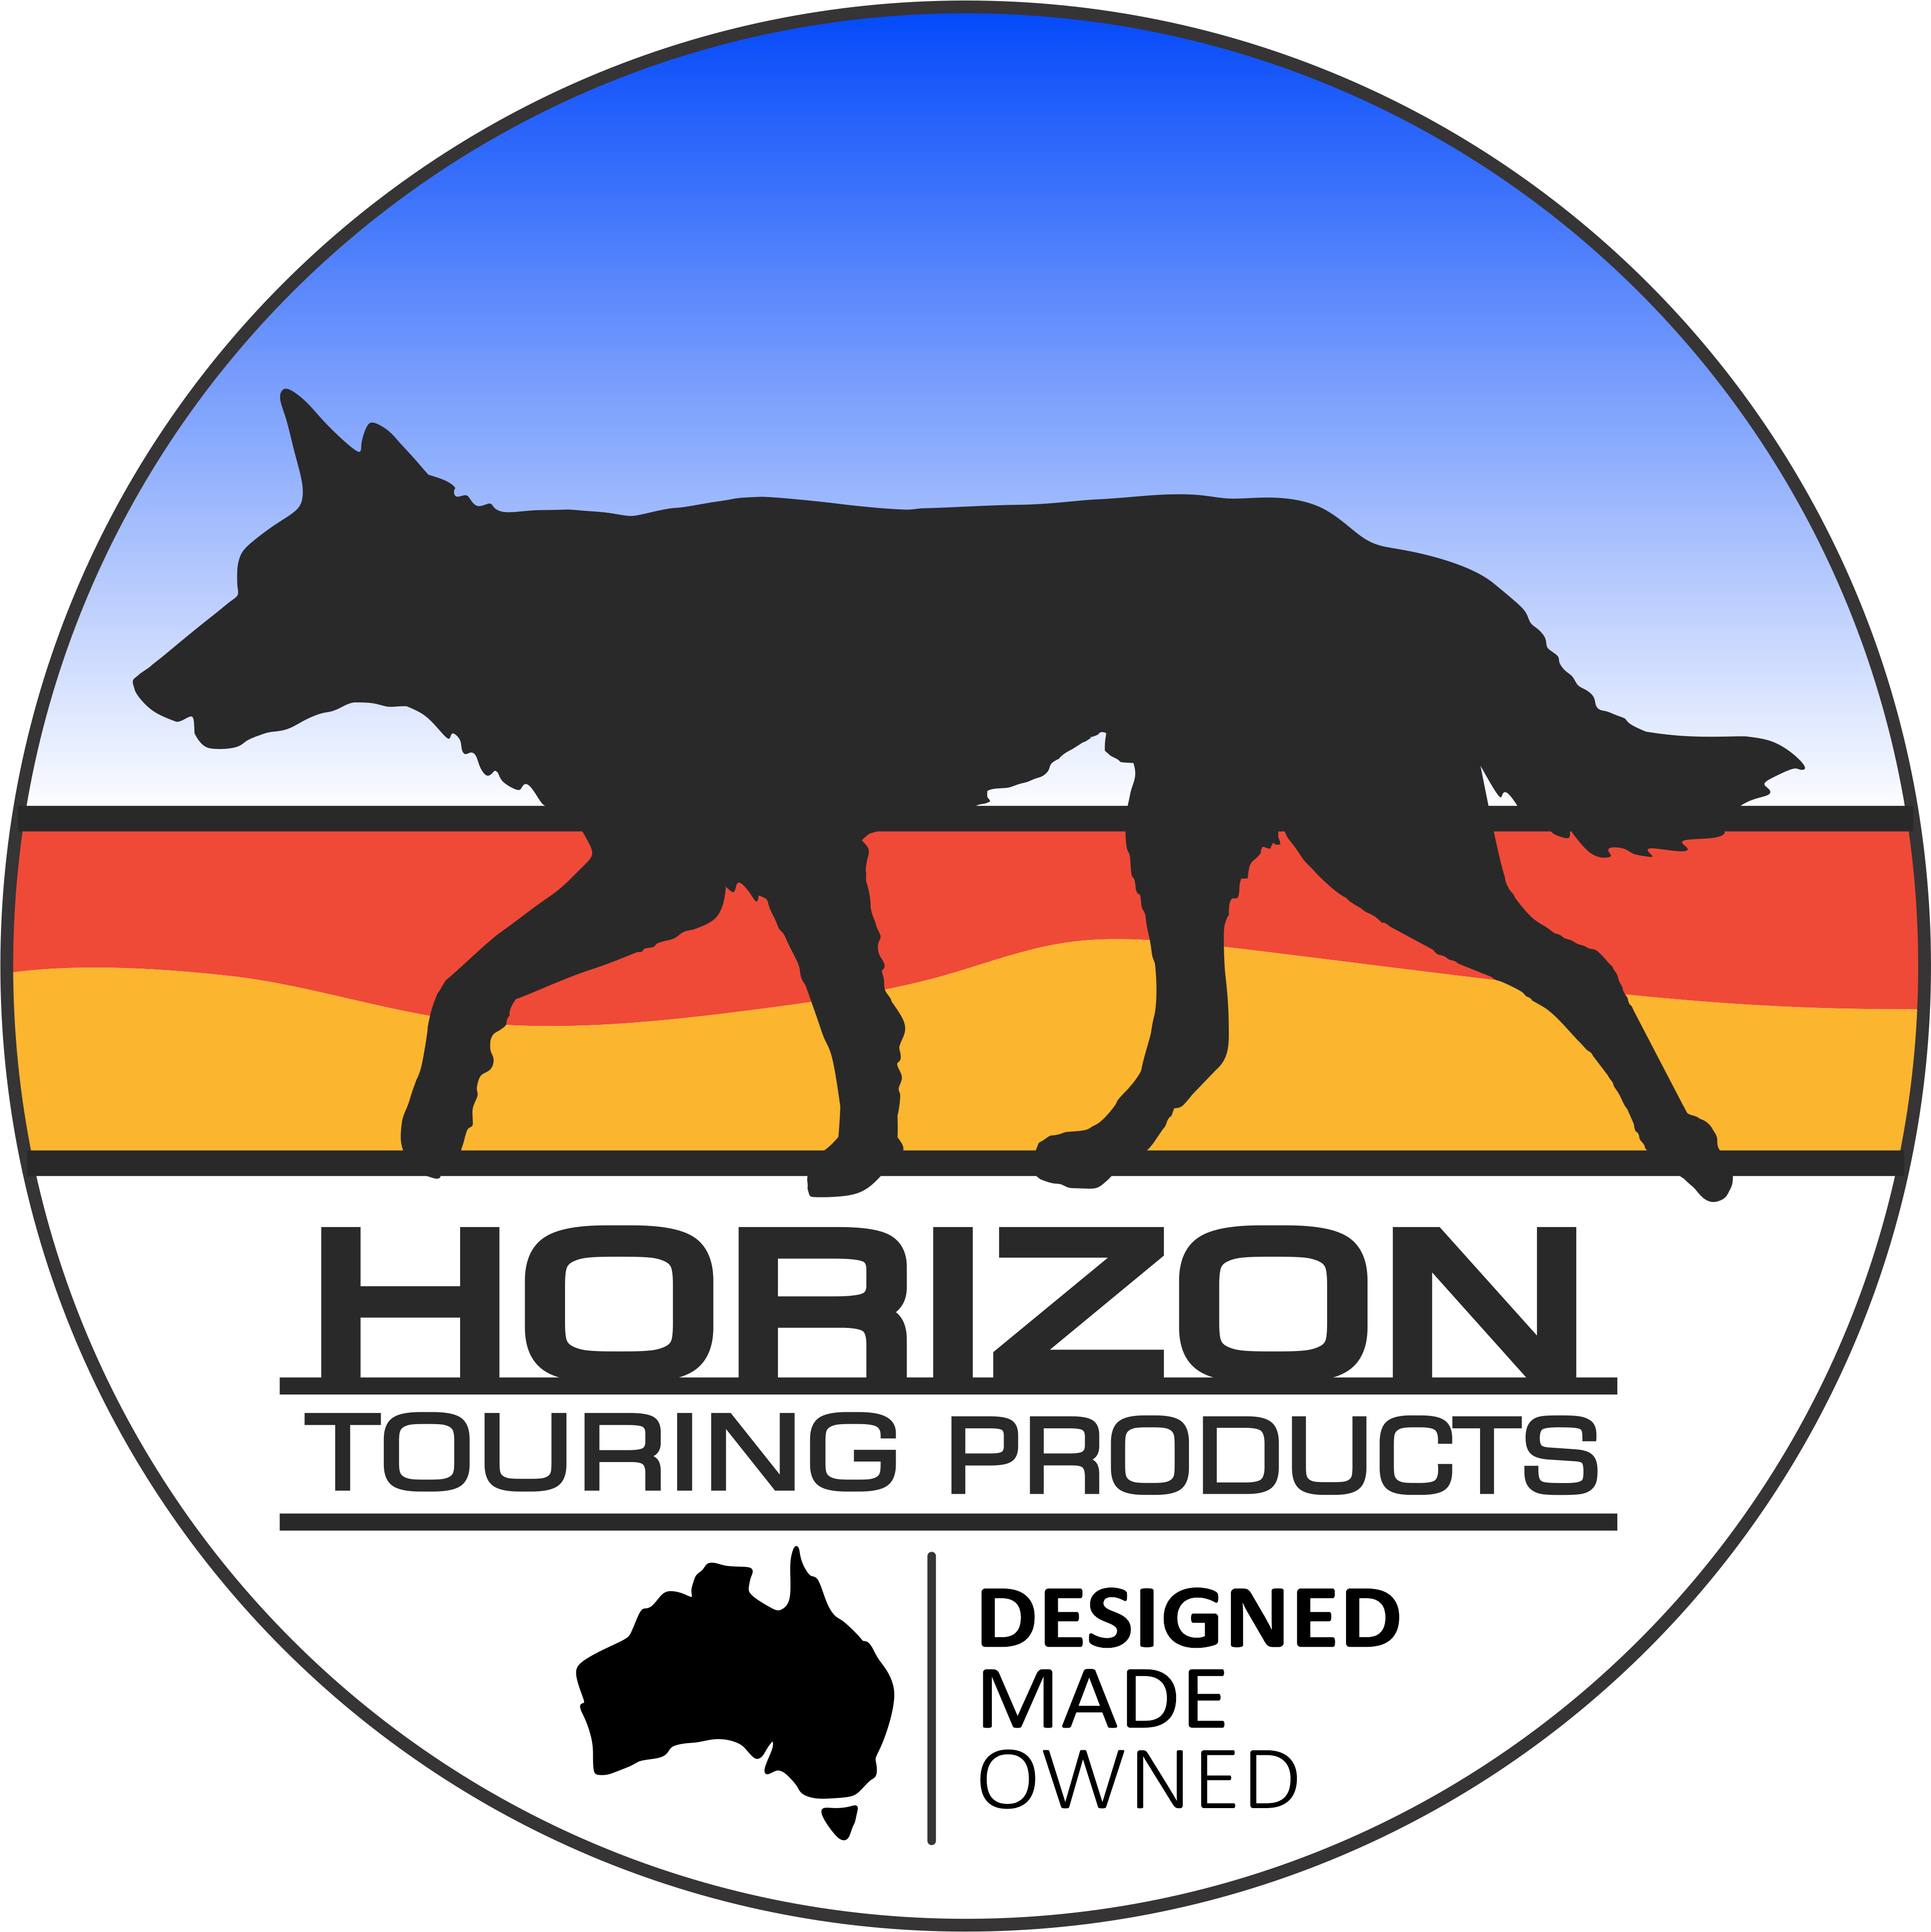 Horizon Touring Products